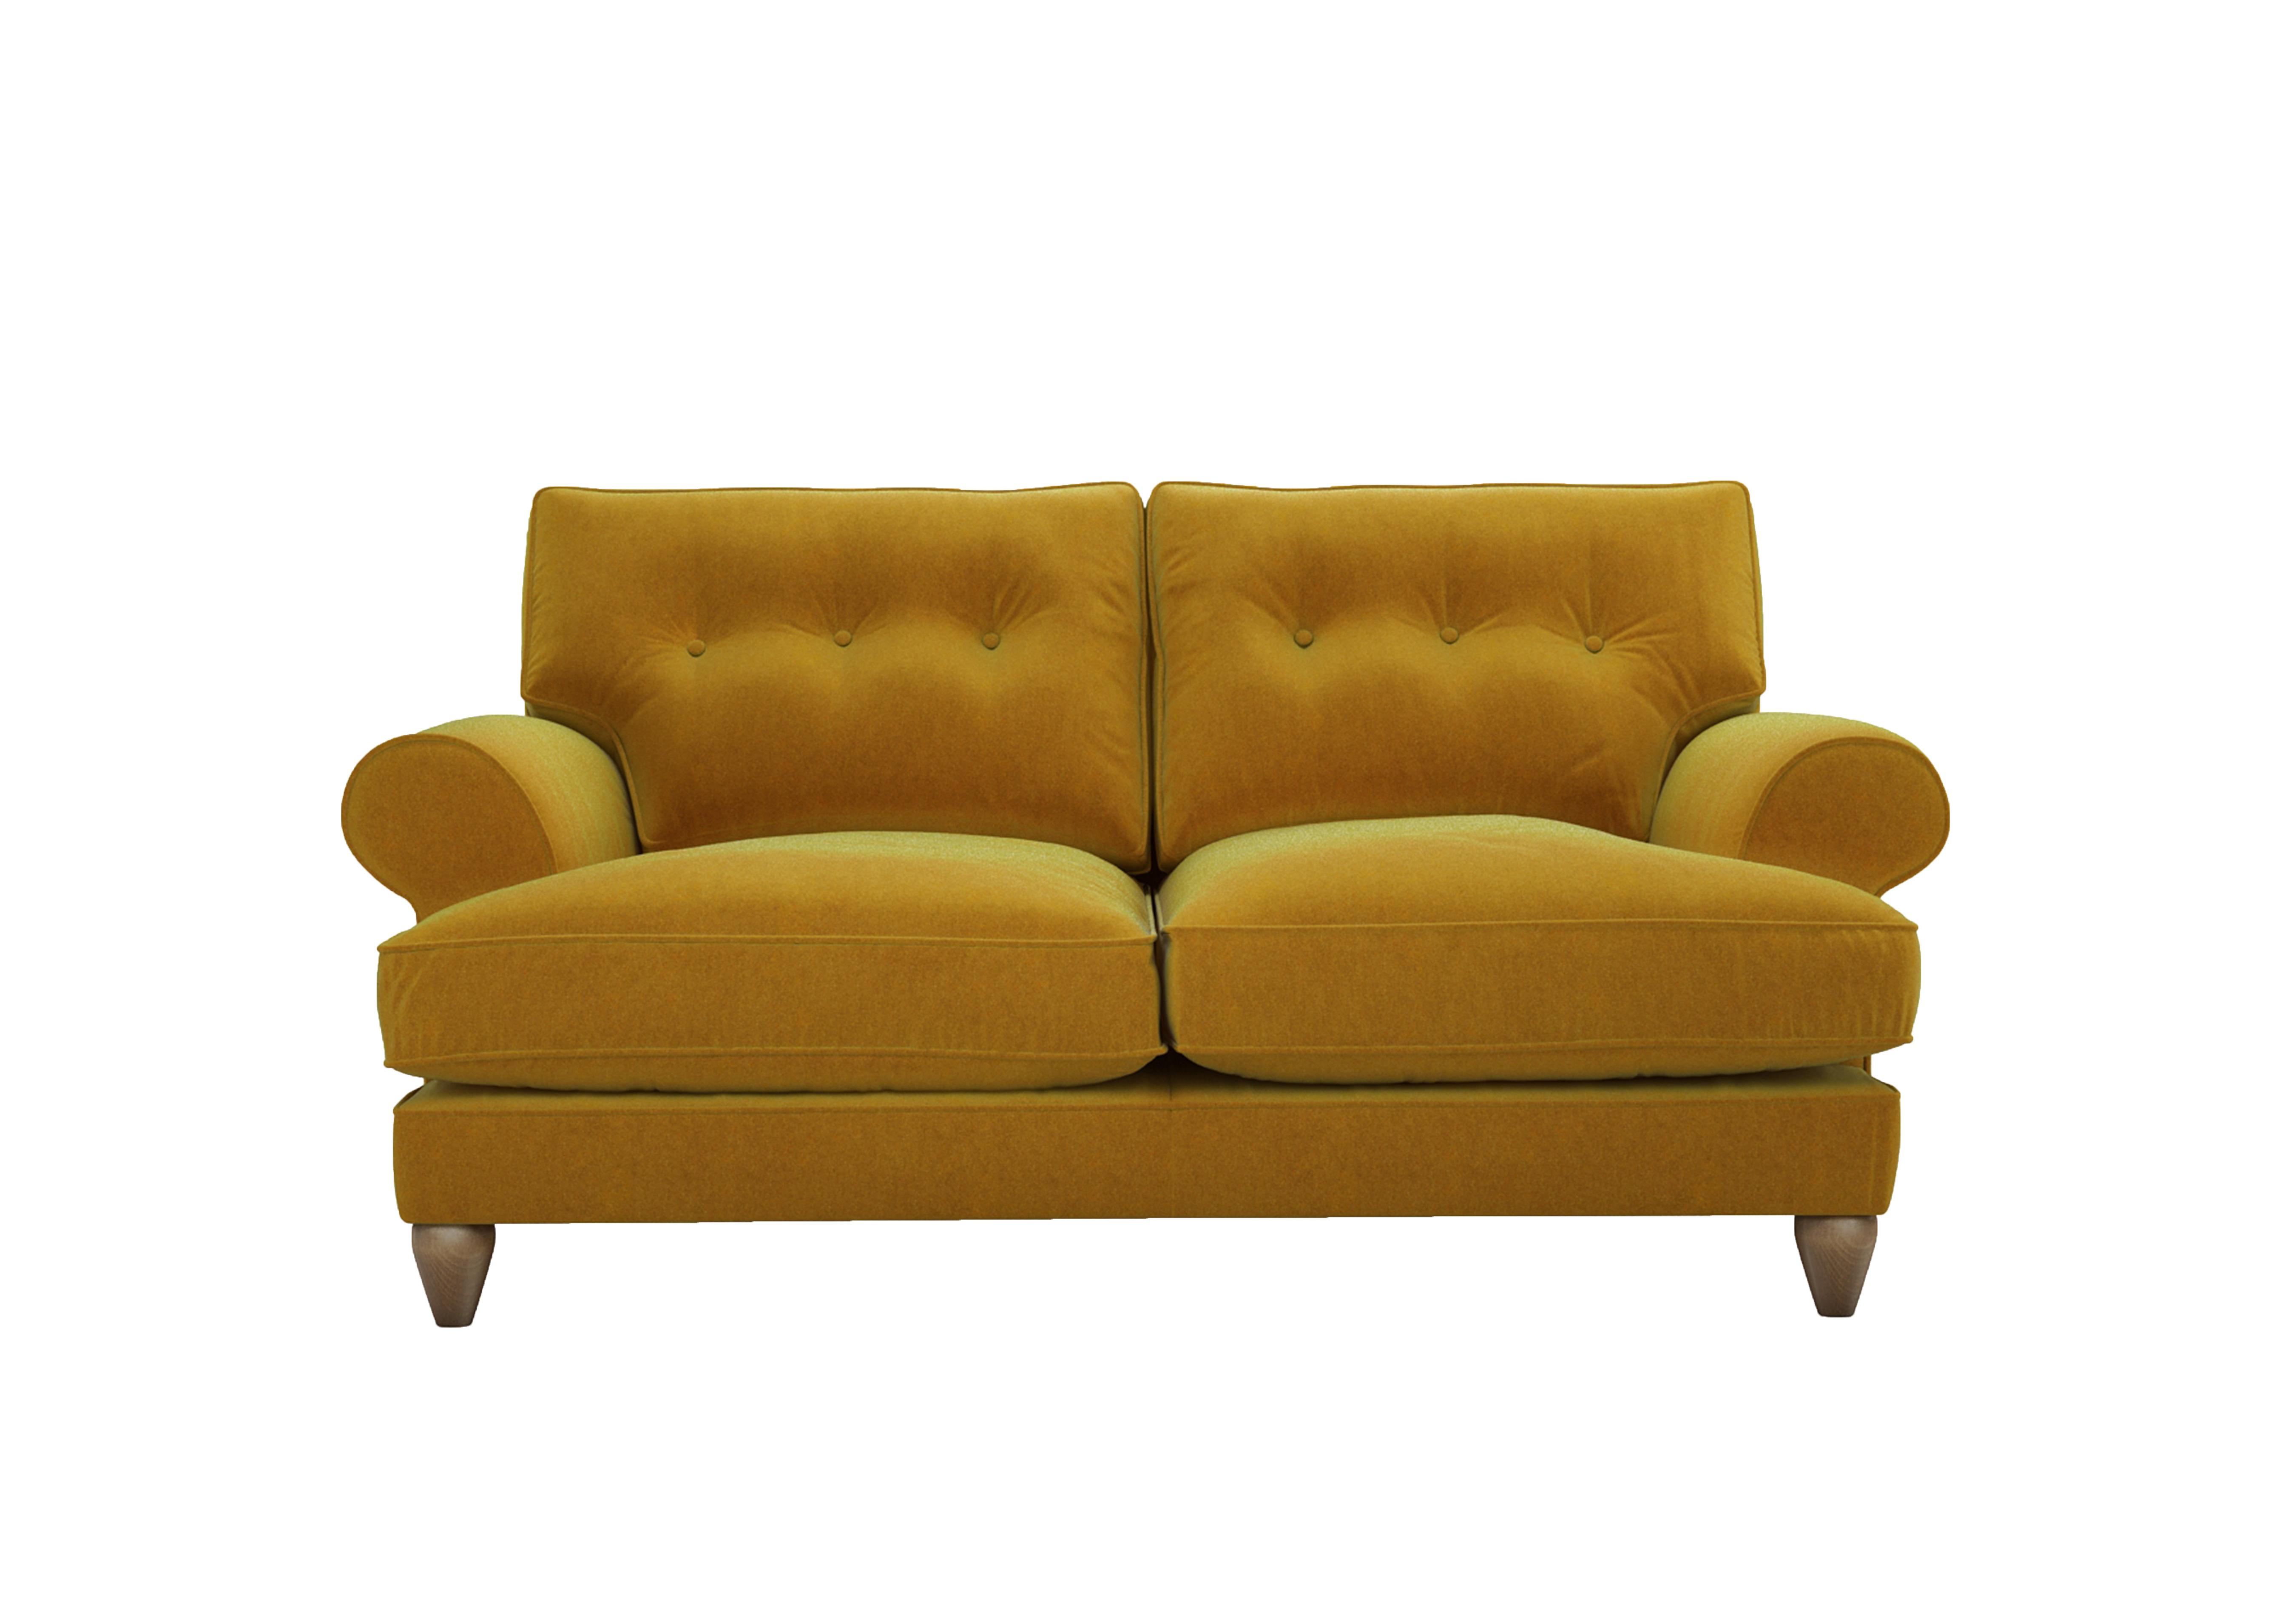 Bronwyn 2.5 Seater Fabric Classic Back Sofa in Gol204 Golden Spice on Furniture Village